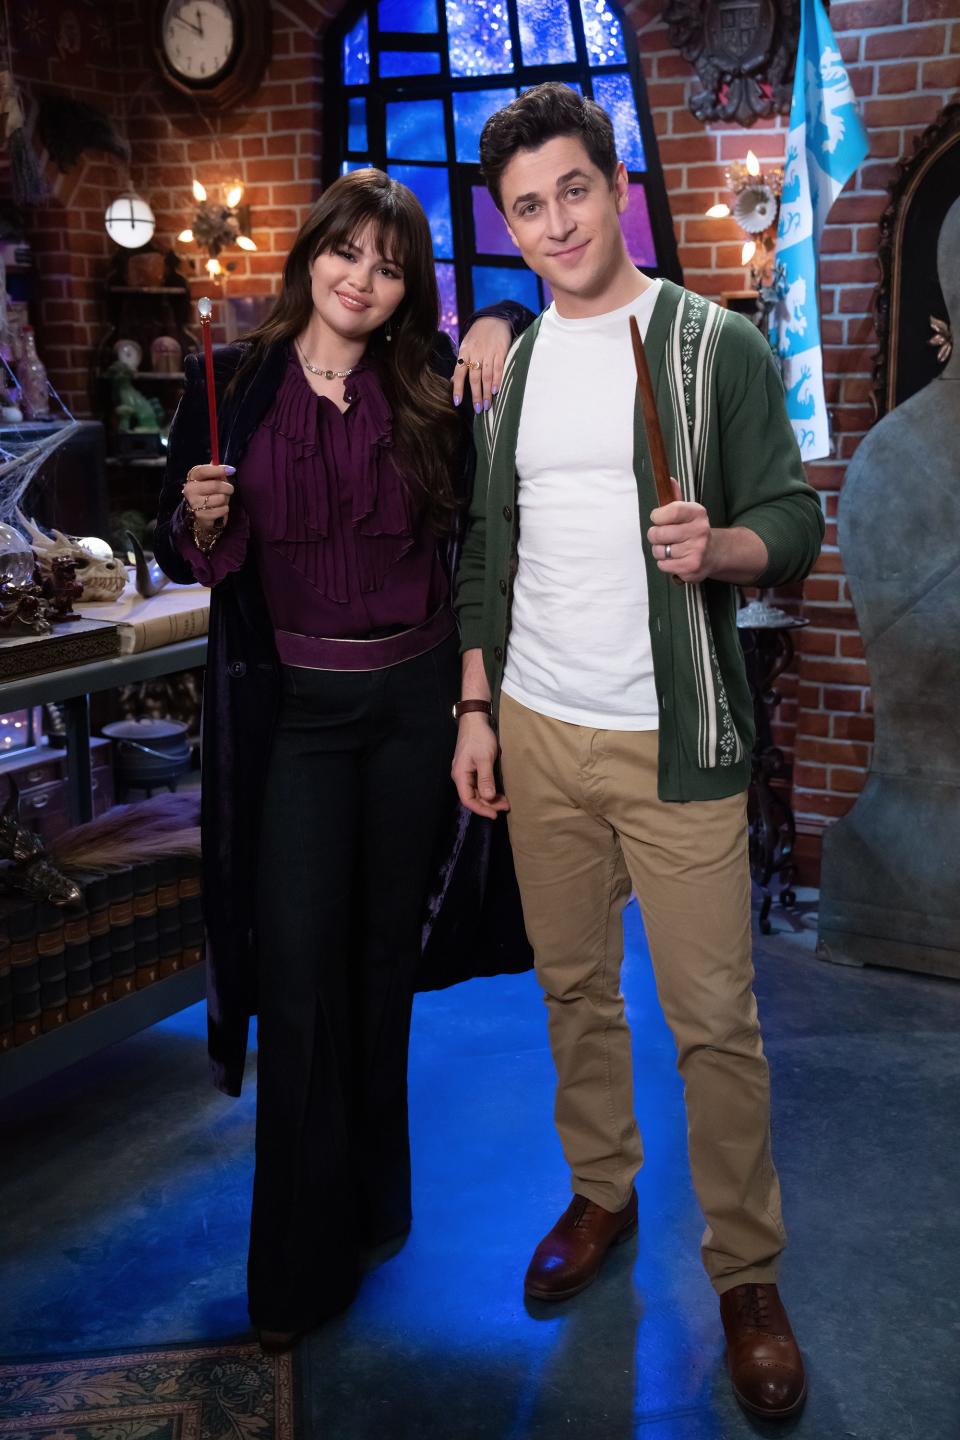 Selena Gomez and David Henrie reprise their roles as magical siblings Alex and Justin Russo in Disney's upcoming "Wizards of Waverly Place" spin-off series.